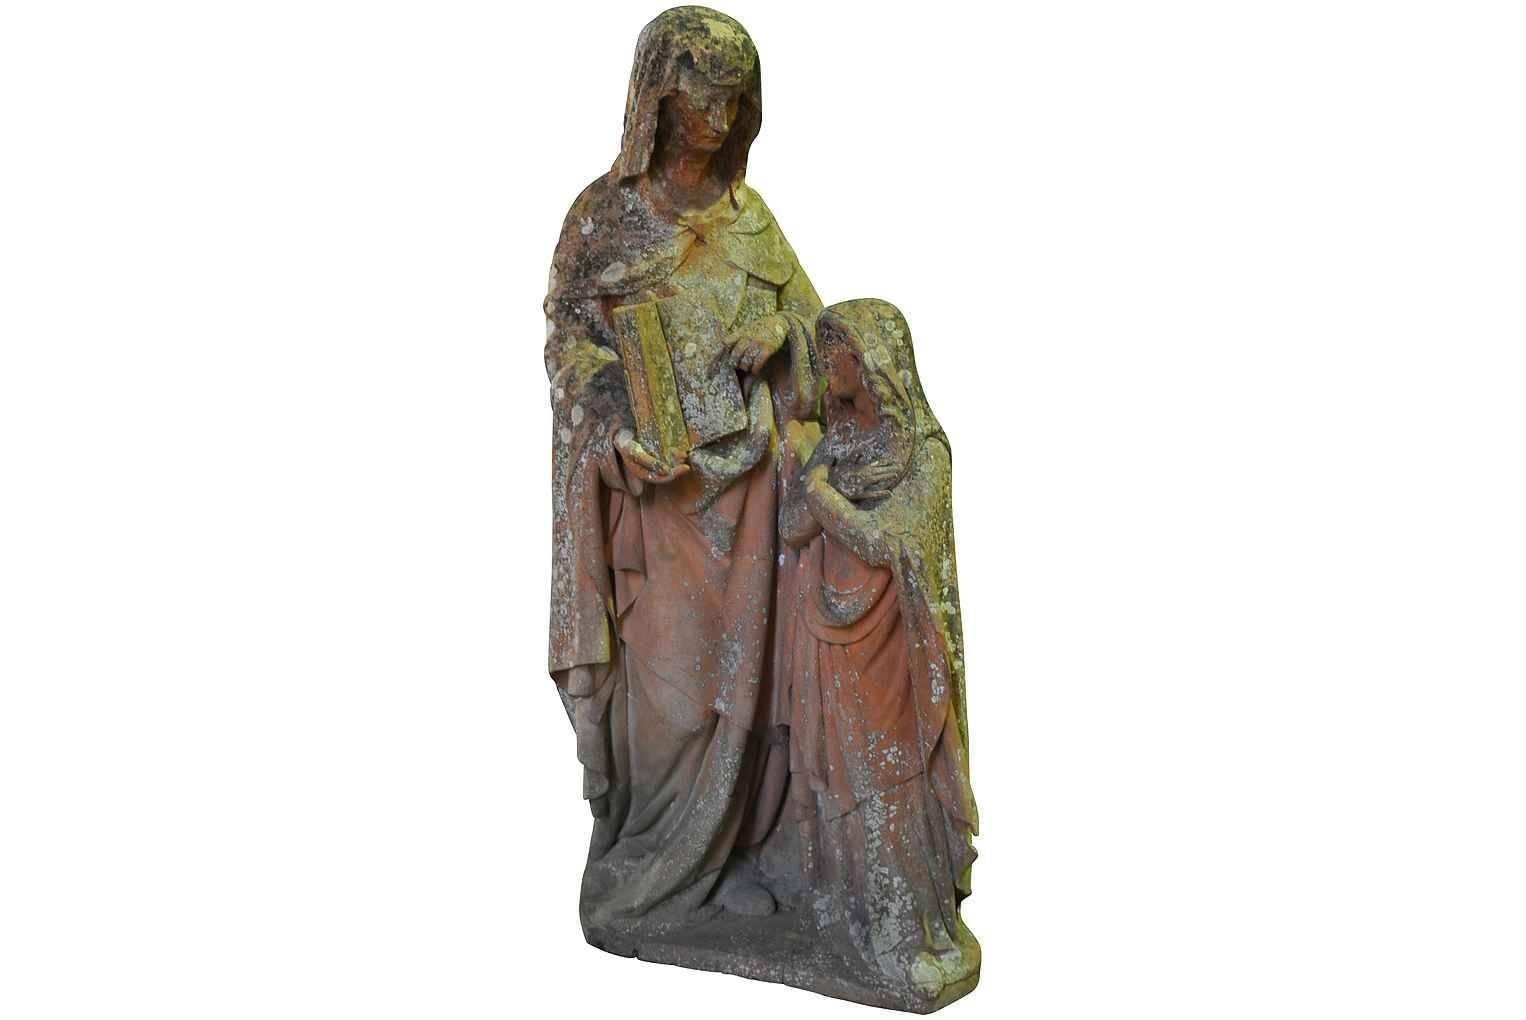 A very beautiful 19th century terracotta statue of a woman and young girl from Northern Italy. Beautifully molded with fine features. A lovely piece for the garden or an interior.